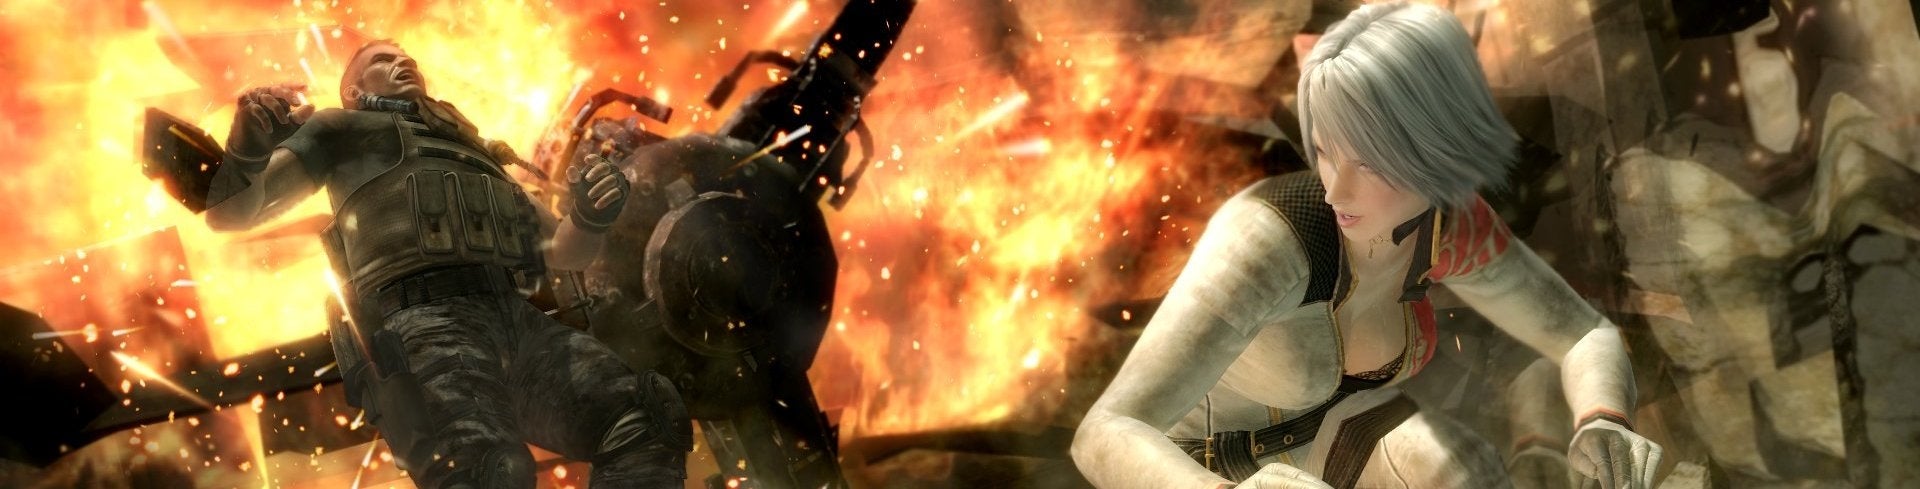 Image for Digital Foundry: Hands-on with Dead or Alive 5 Last Round